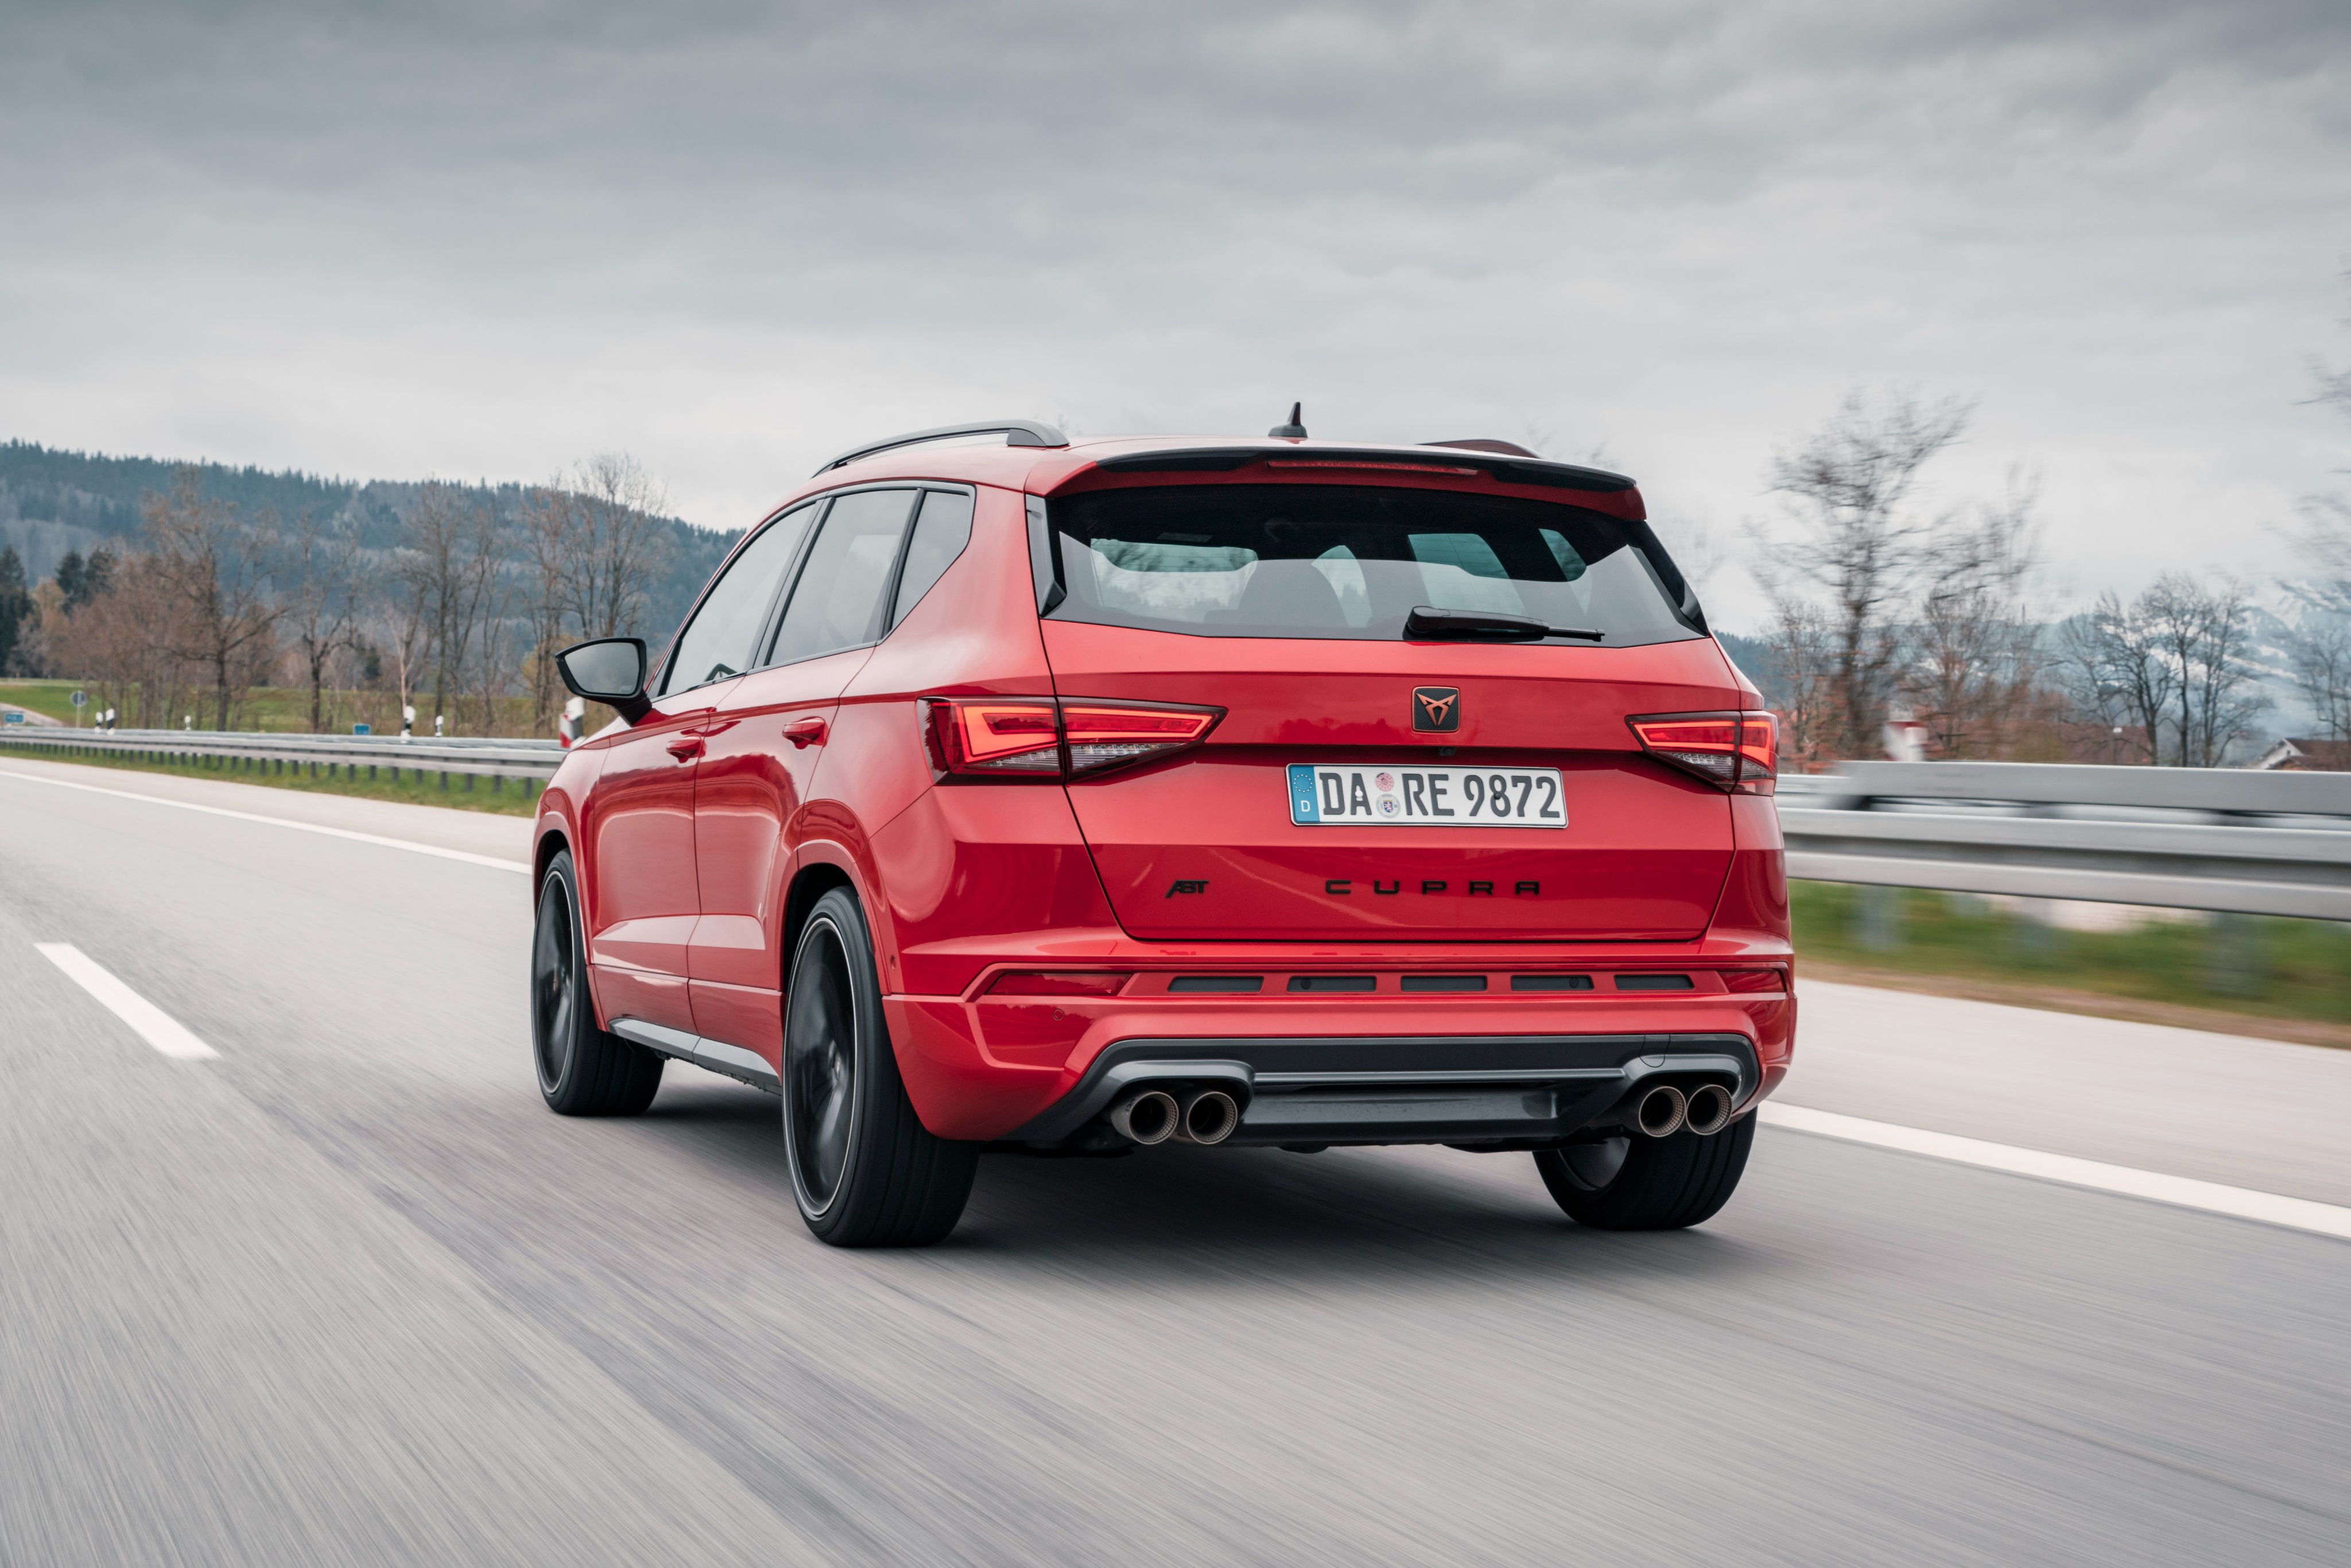 ABT Sportsline on X: Always bold, never average - the CUPRA Ateca in  velvet red on the cover of our new uptrend magazine:   #ABT #ABTsportsline #SEAT #CUPRA #SEATateca  #CUPRAateca #Ateca #tuning #